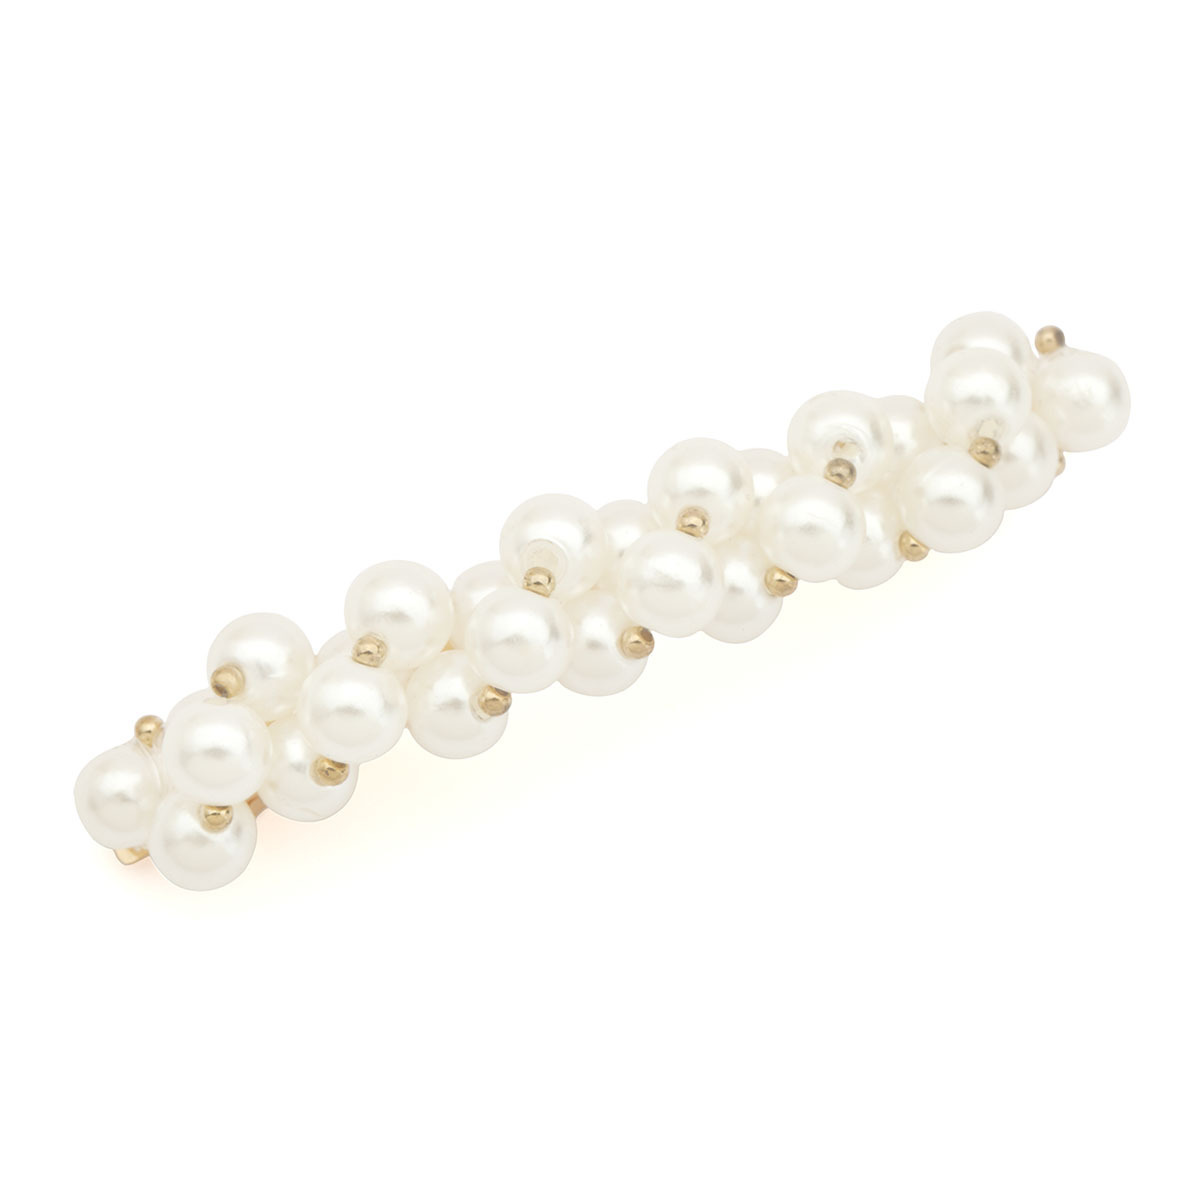 Camille Hair Clip Glass Pearls | Accessories | Amber Sceats